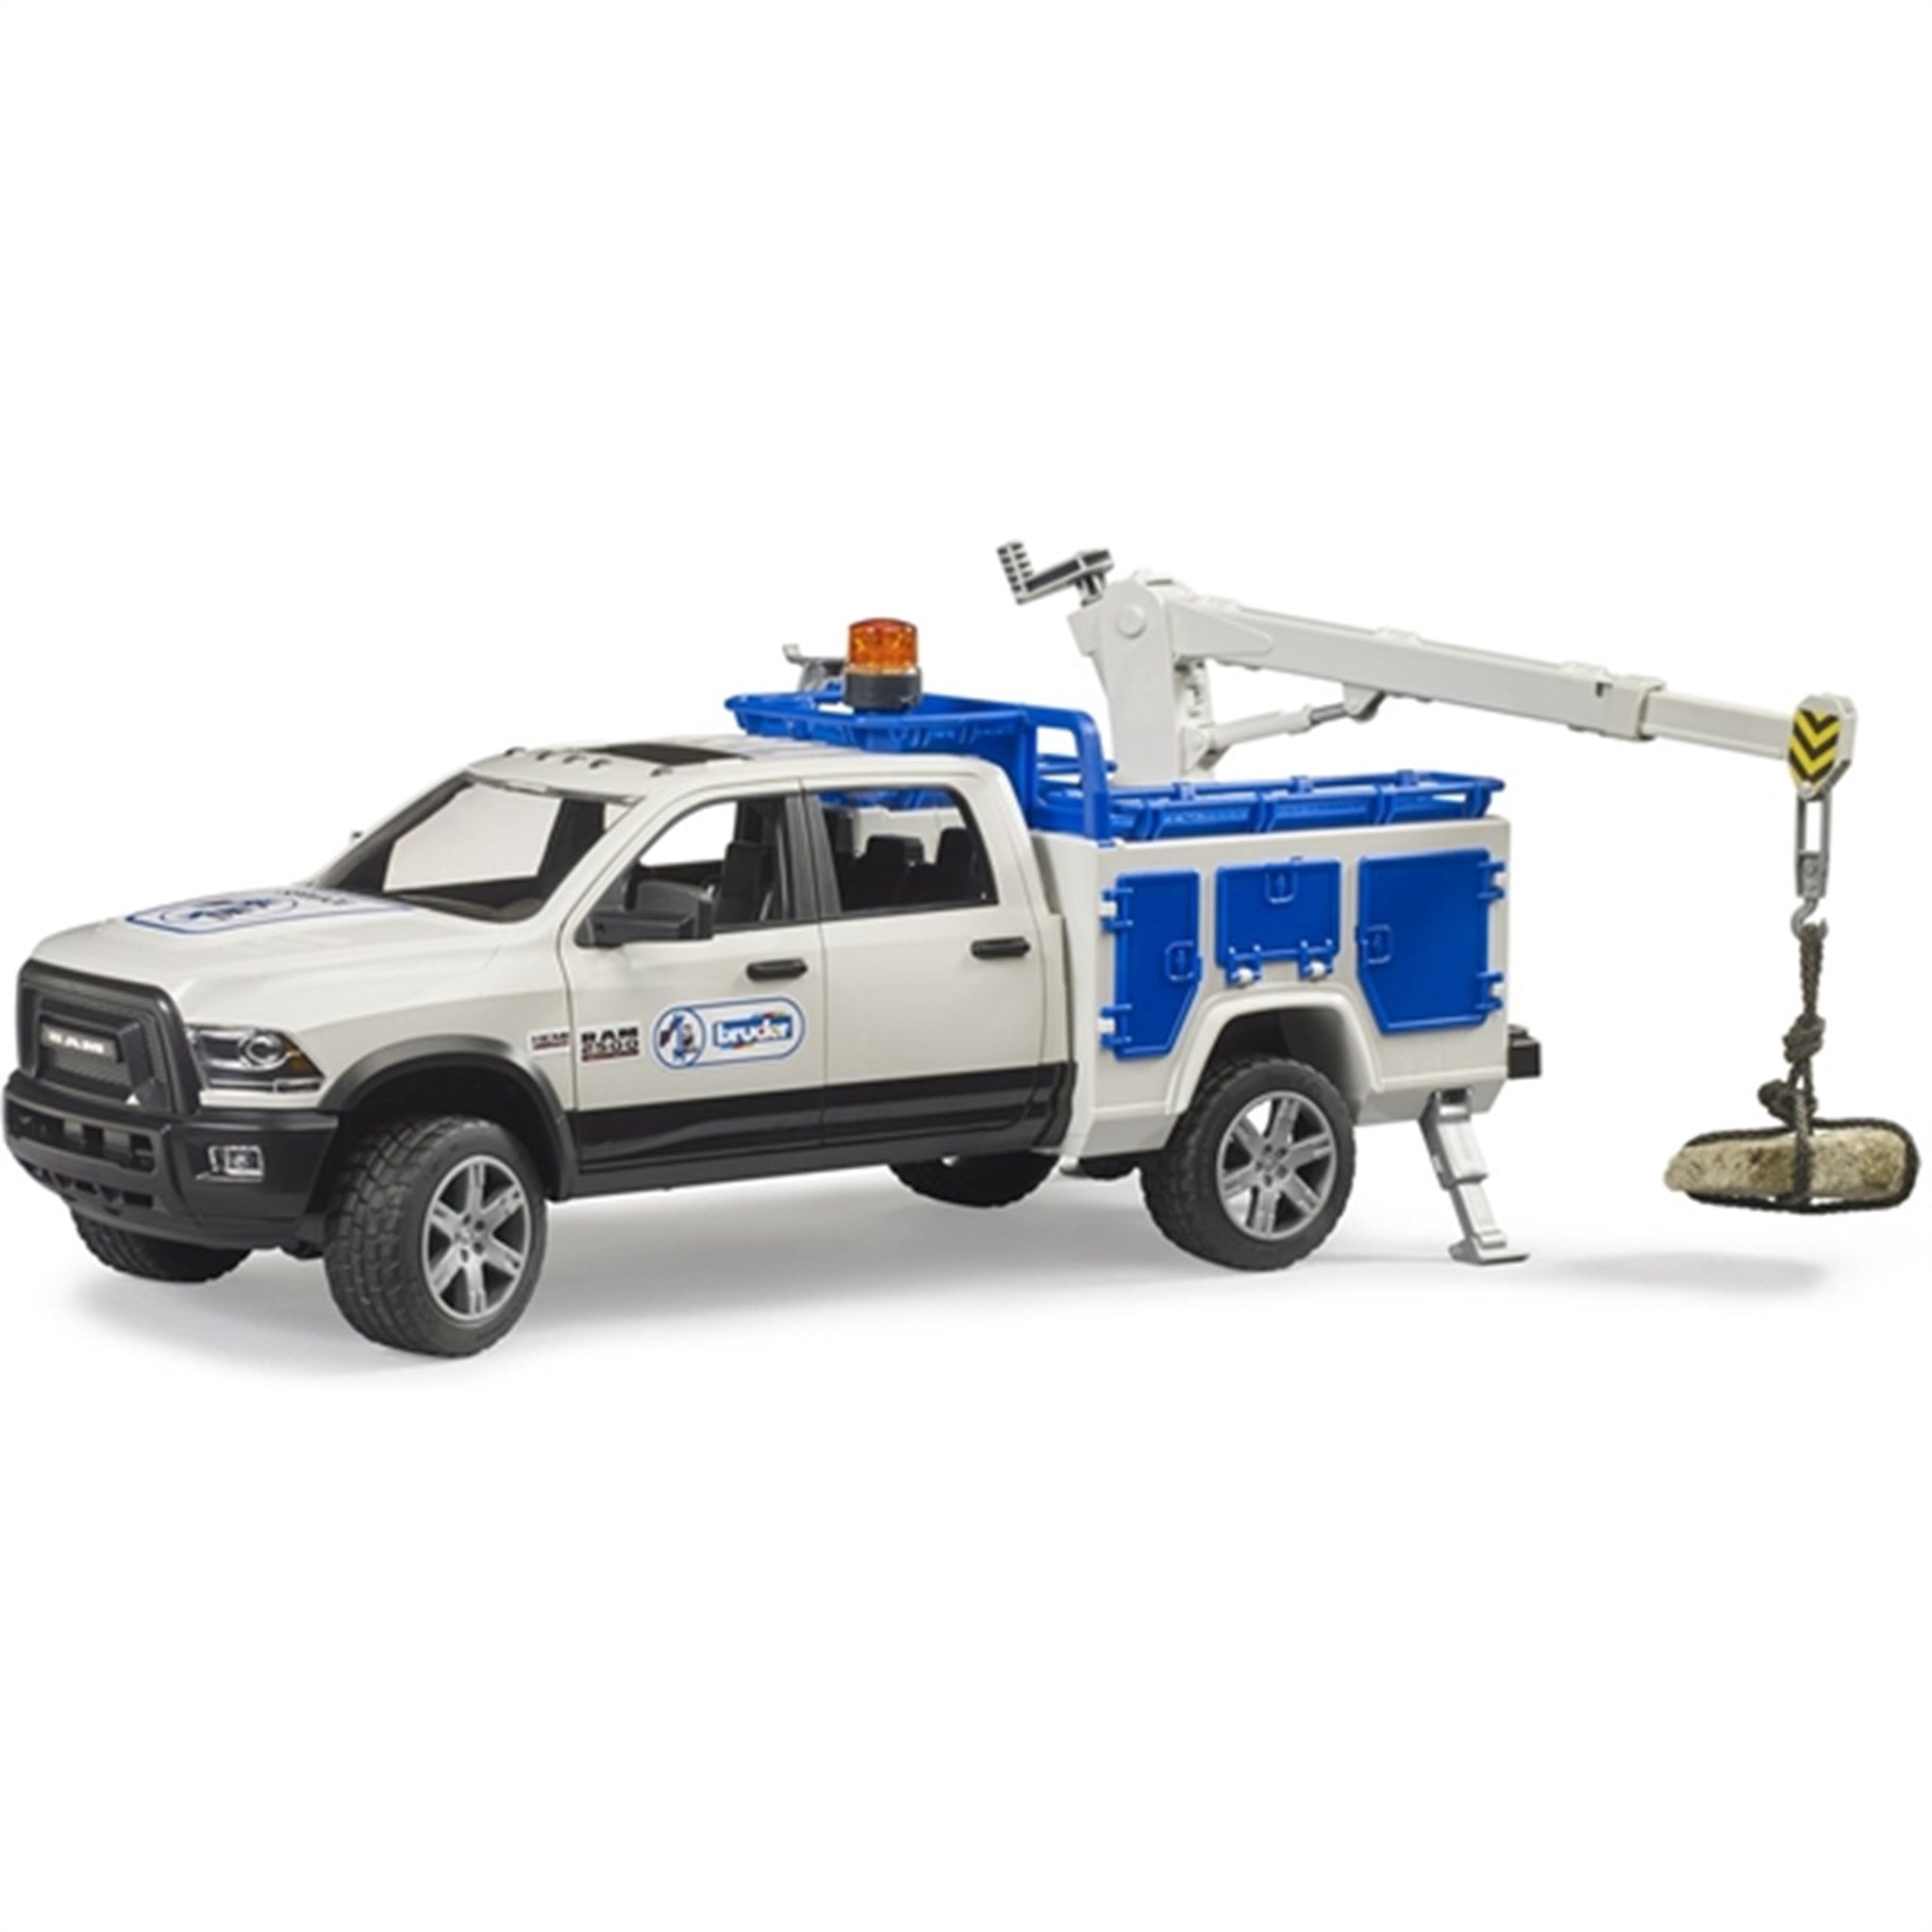 Bruder RAM 2500 Service Truck with Rotating Beacon Light